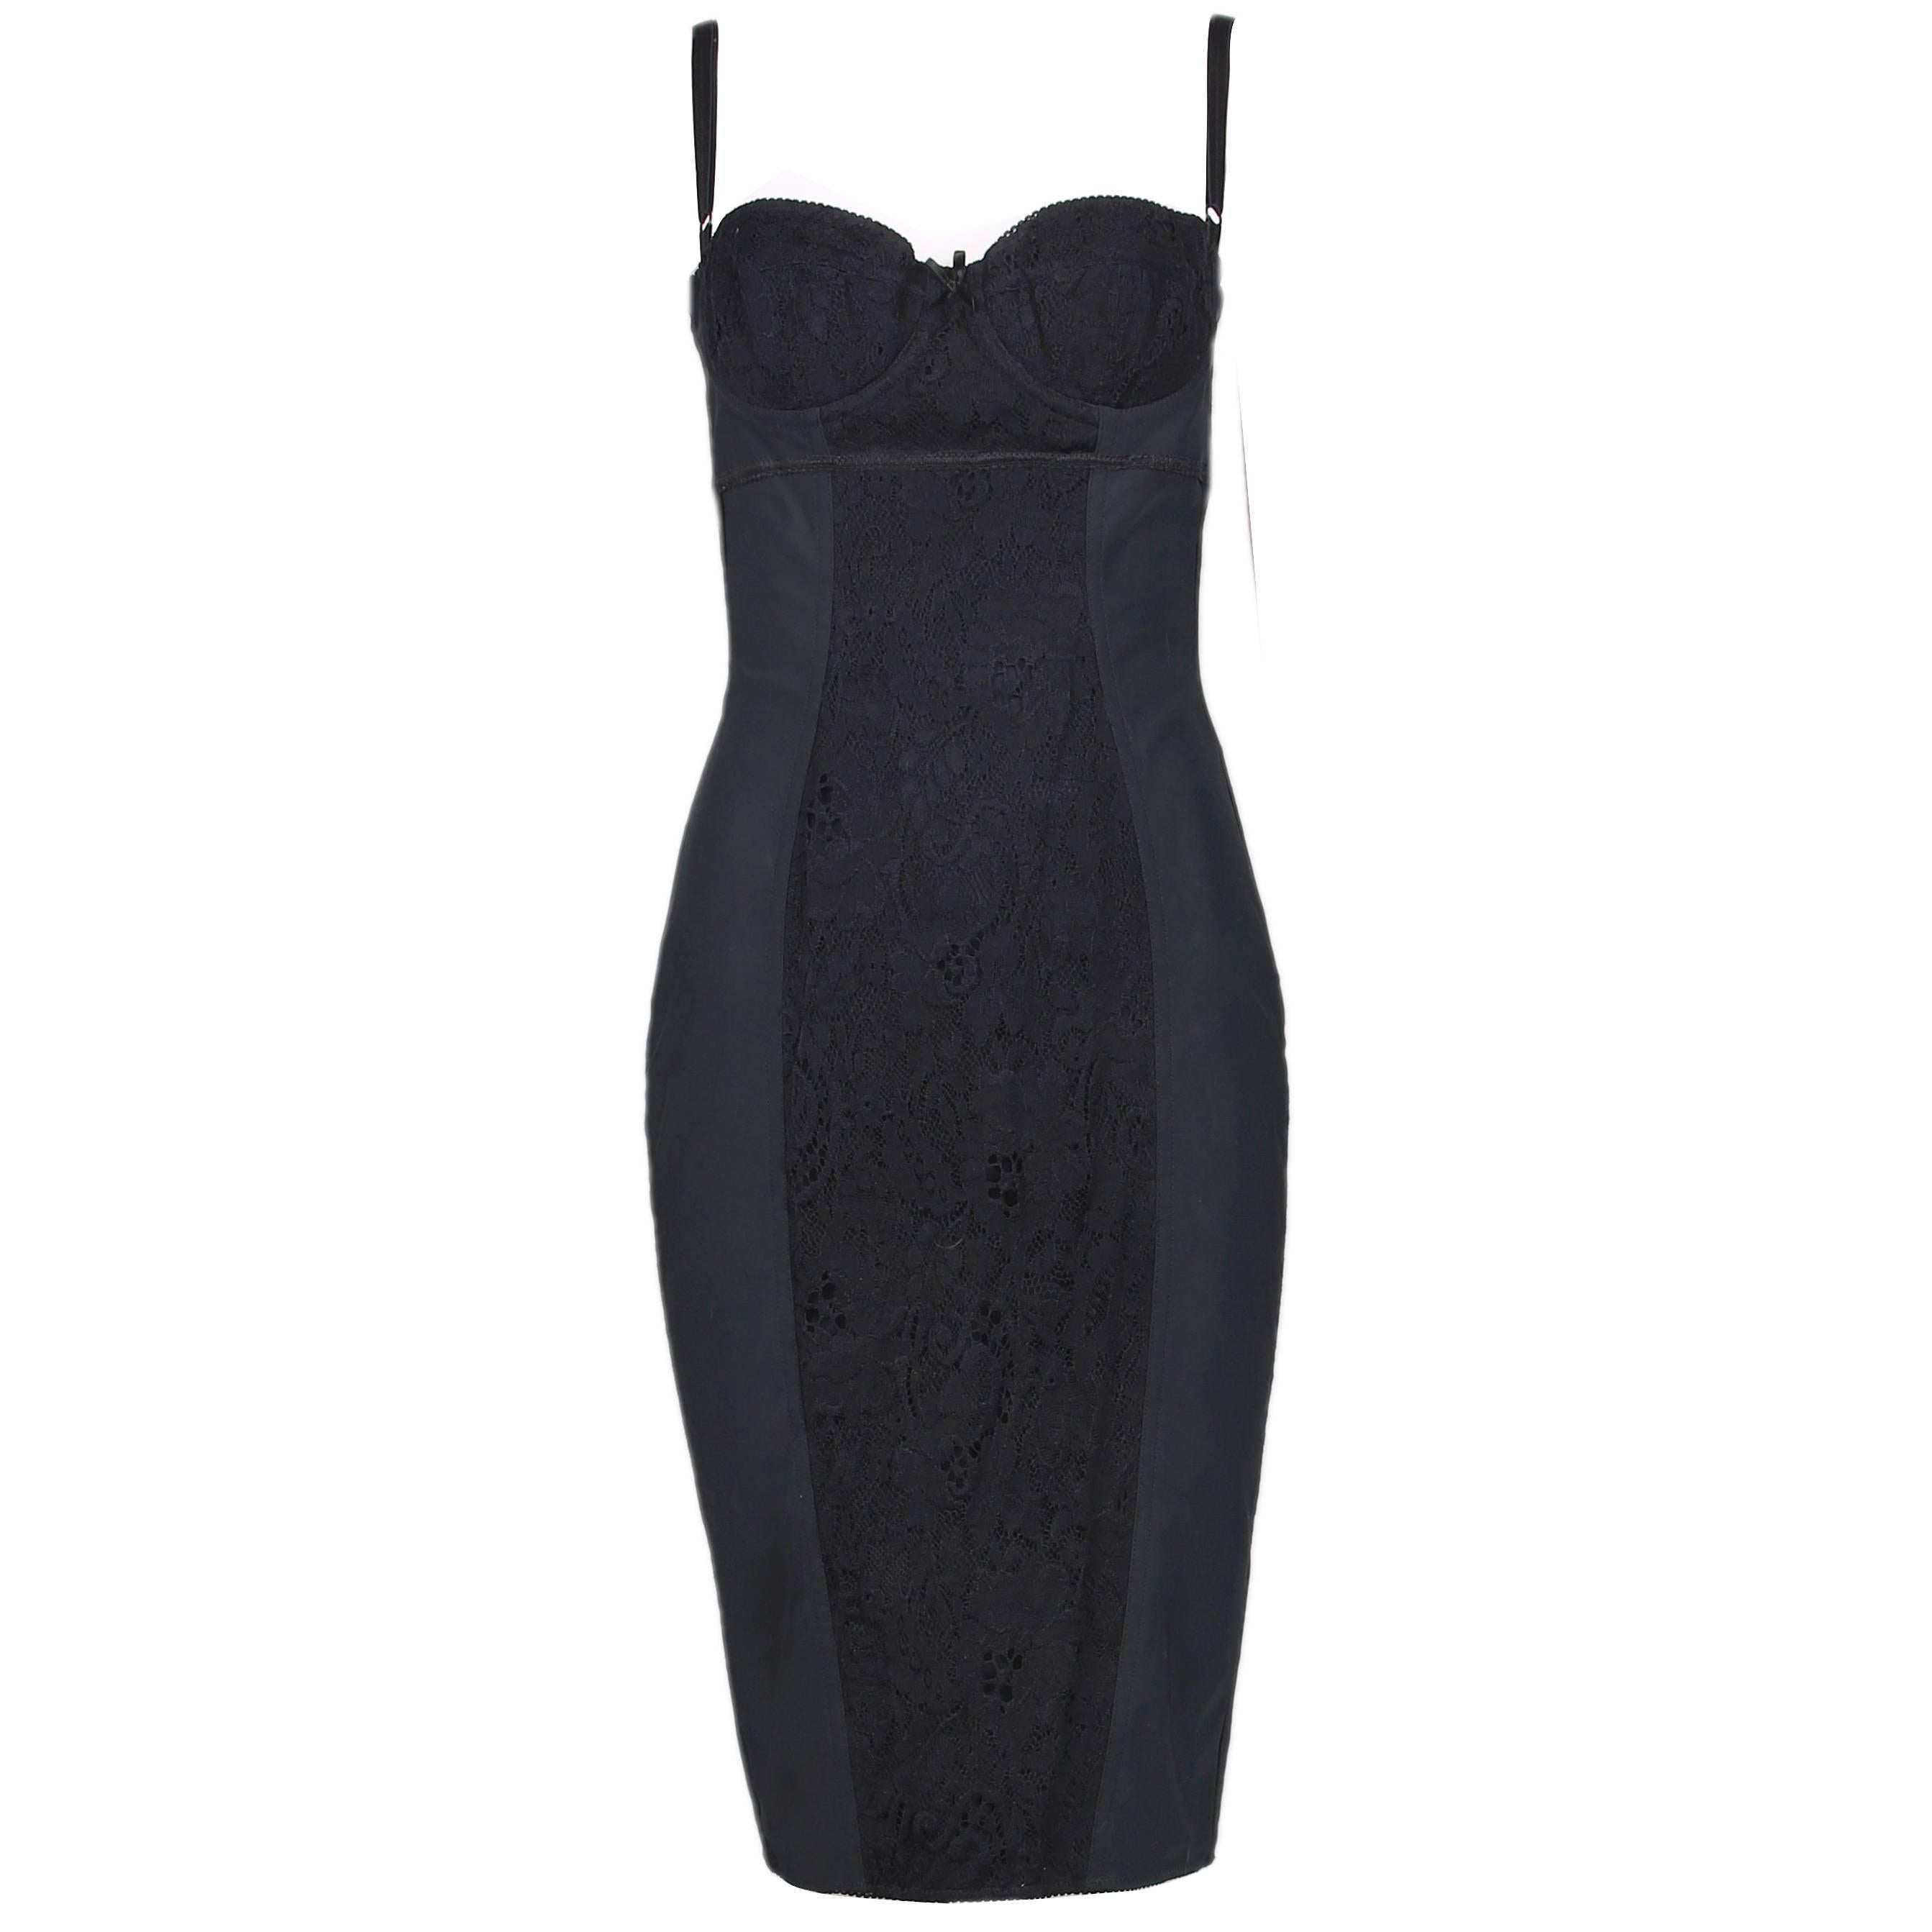 Dolce & Gabbana Black Bodycon Bustier Dress w/Lace Insets For Sale